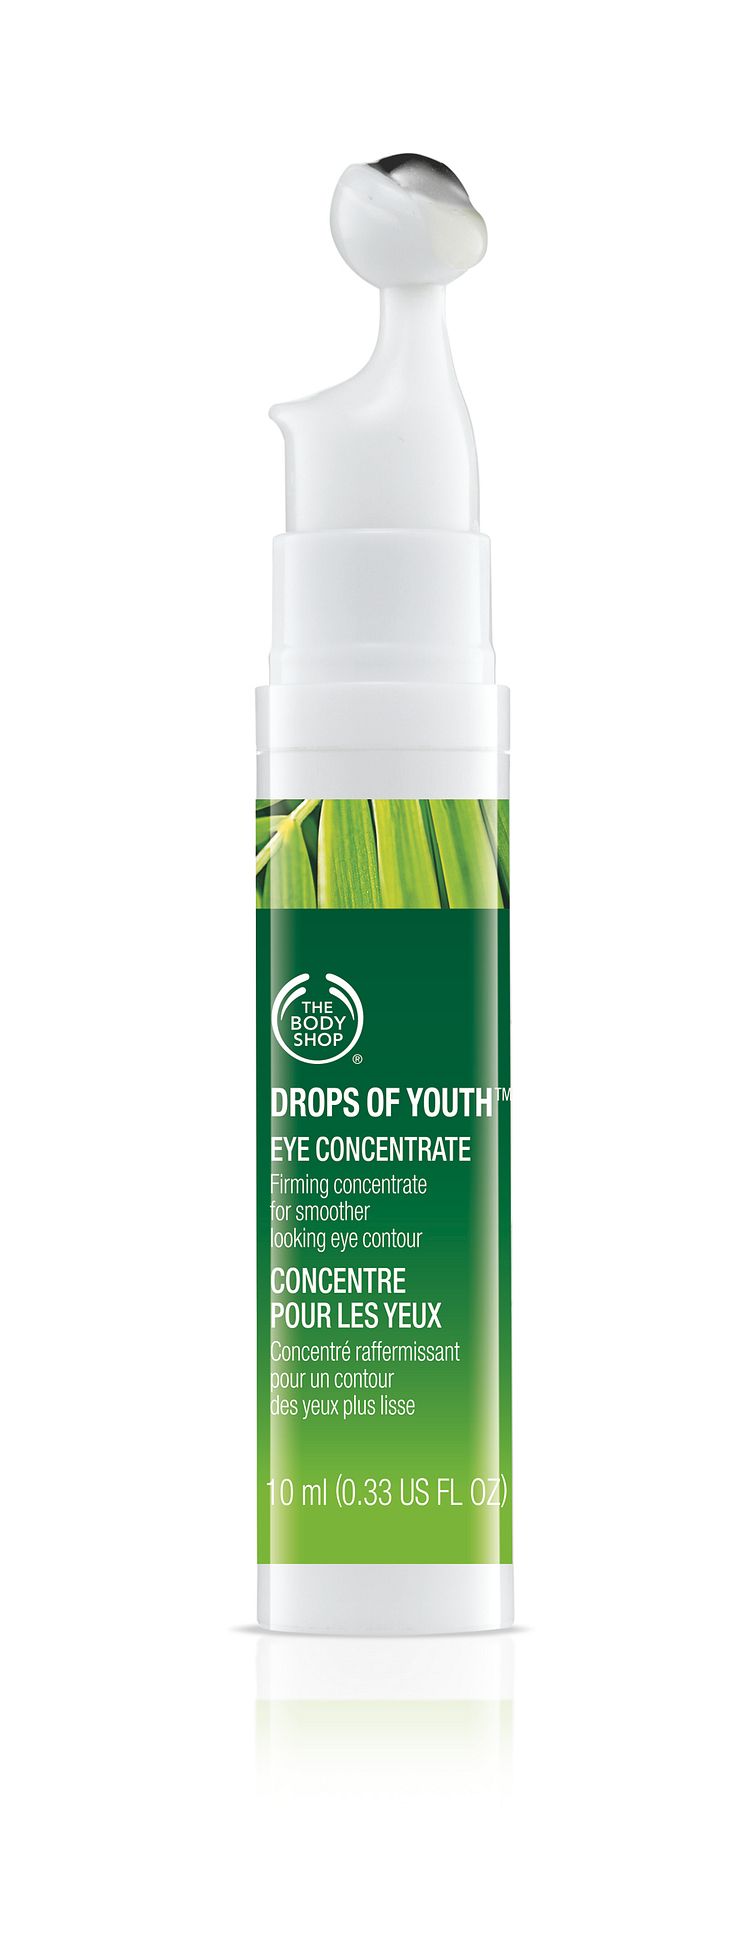 Drops of Youth™ Eye Concentrate (without lid)